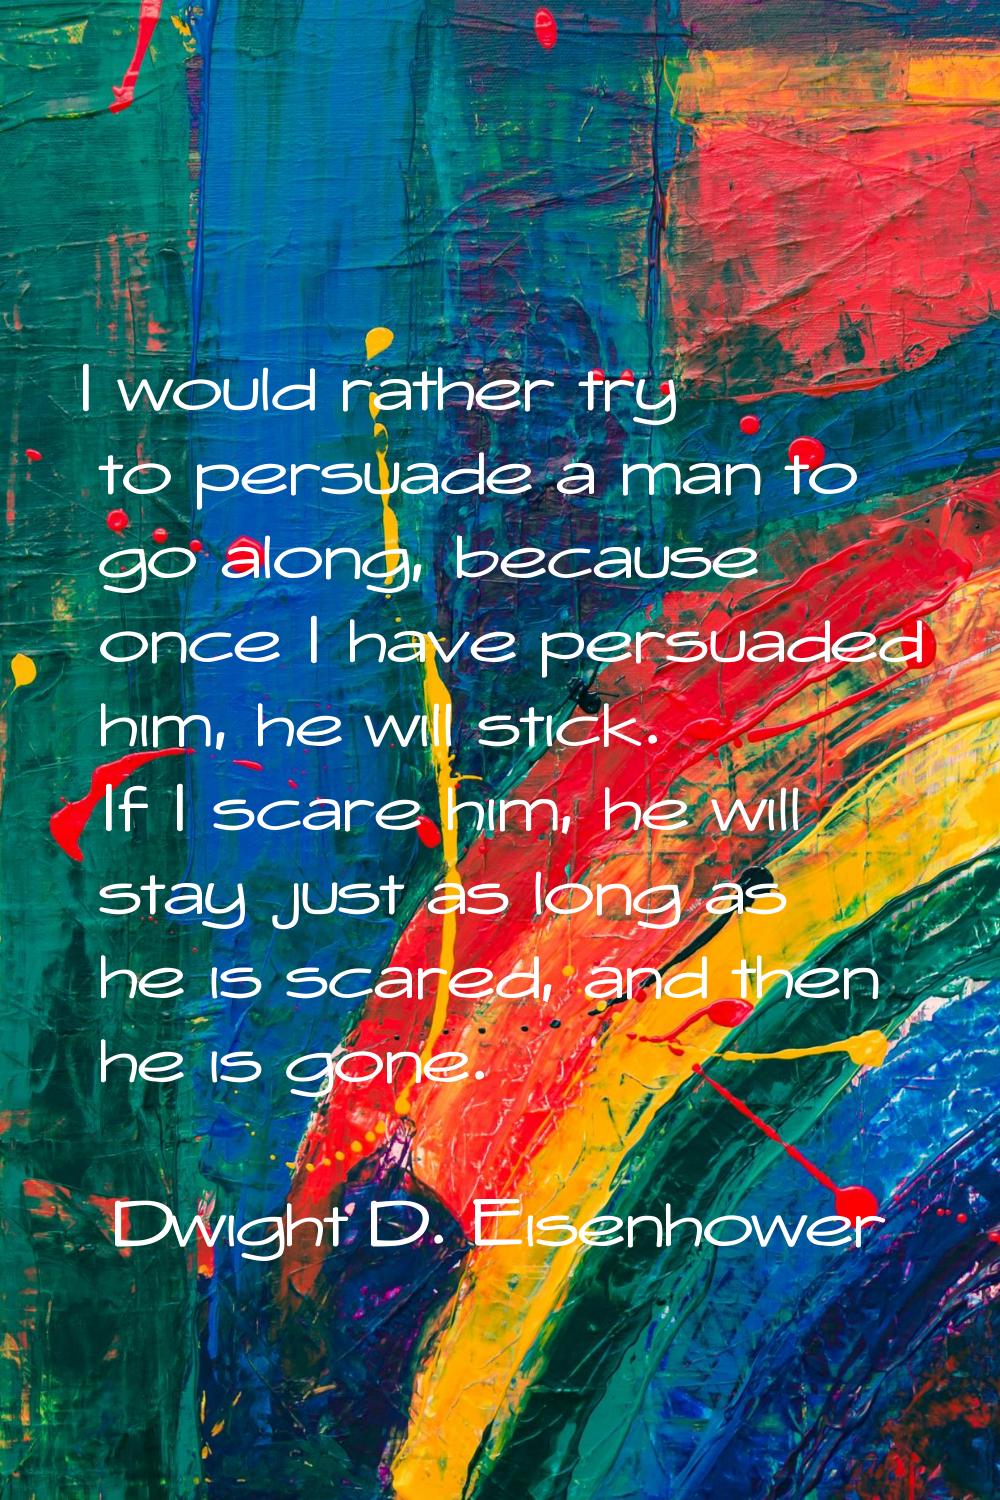 I would rather try to persuade a man to go along, because once I have persuaded him, he will stick.